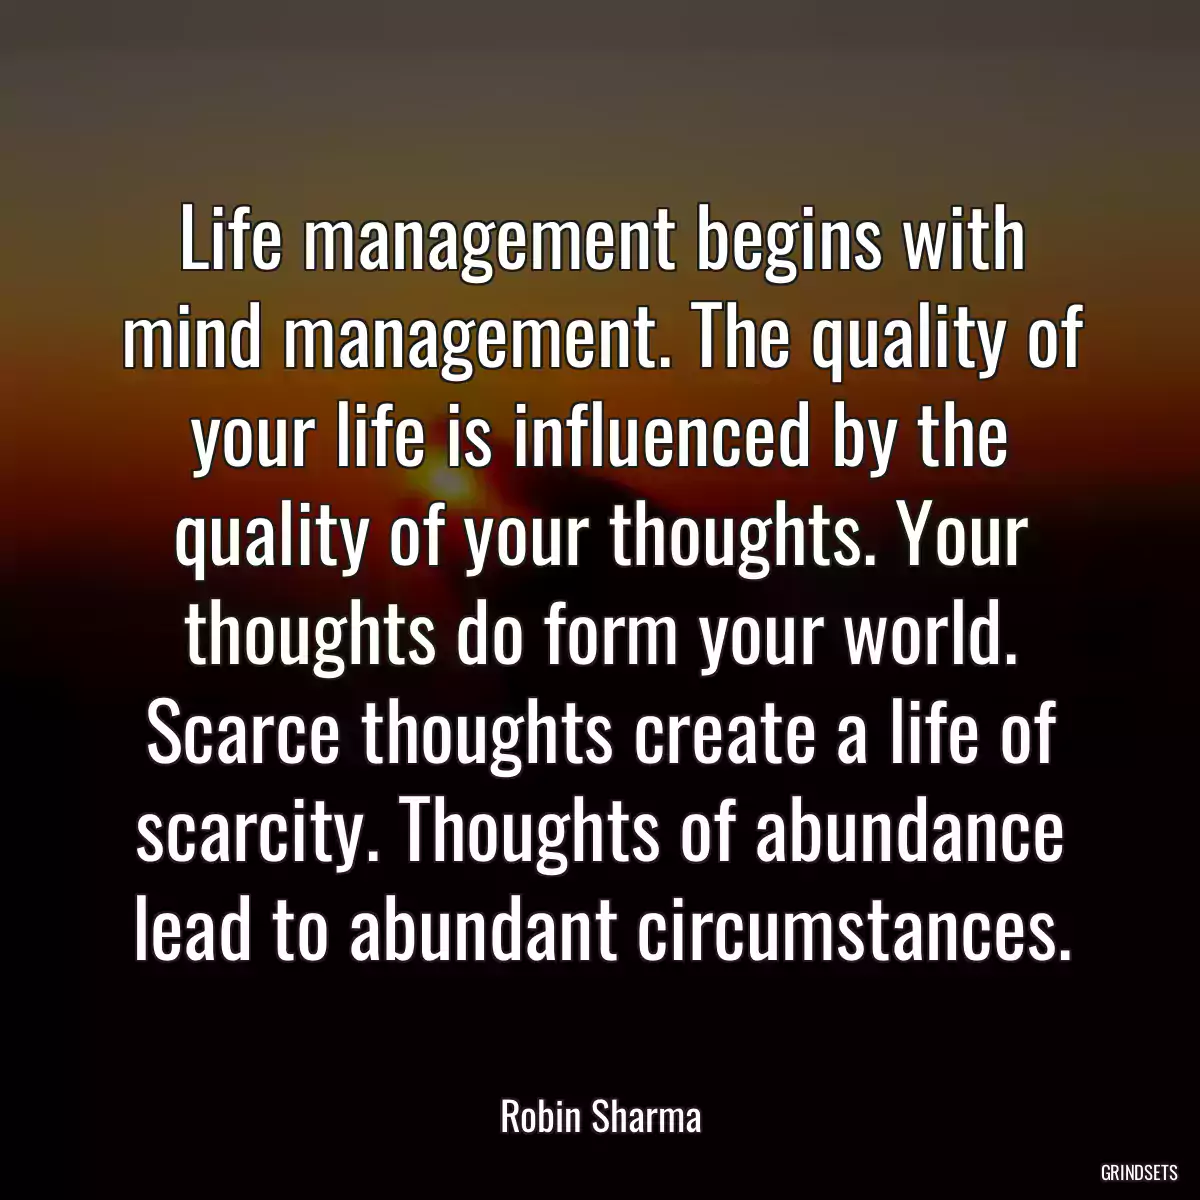 Life management begins with mind management. The quality of your life is influenced by the quality of your thoughts. Your thoughts do form your world. Scarce thoughts create a life of scarcity. Thoughts of abundance lead to abundant circumstances.